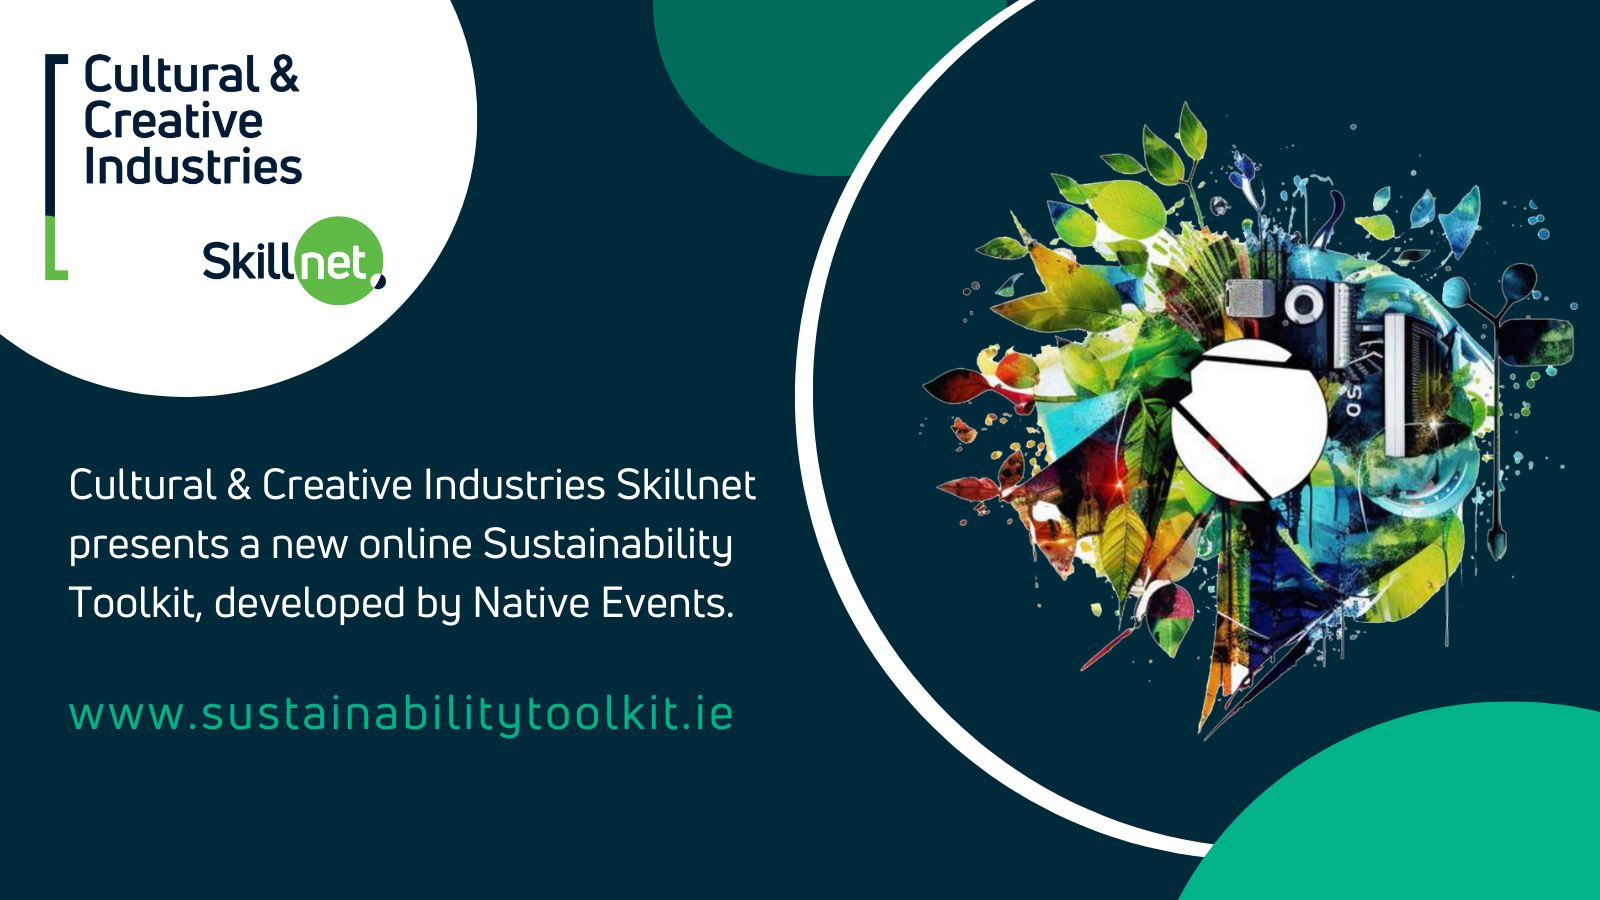 Cultural & Creative Industries Skillnet Launches Innovative Sustainability Toolkit for Ireland’s Creative, Arts and Media Sector